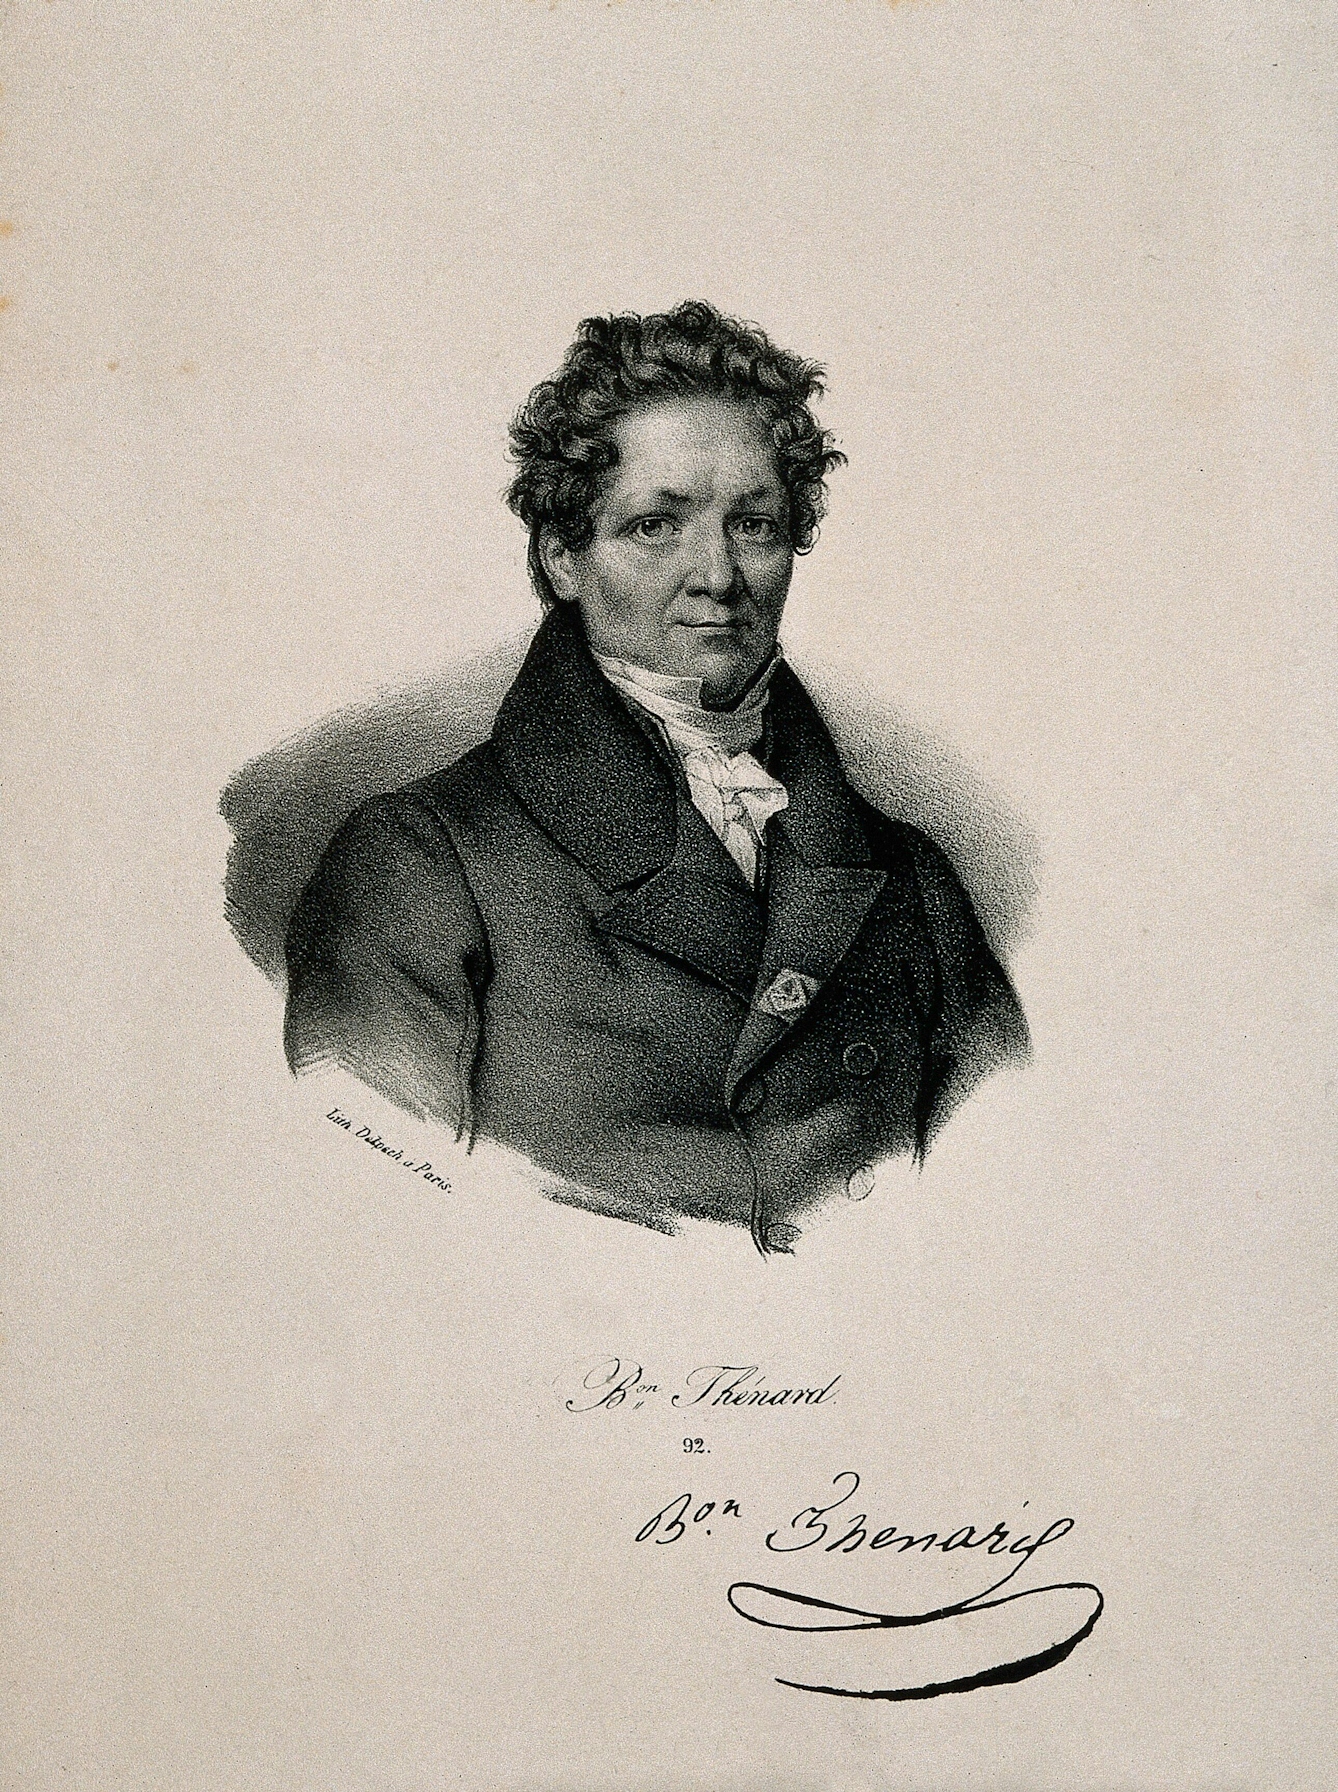 Black and white lithograph portrait, showing the head, shoulders and chest of a man, looking straight ahead. He has short dark hair, and he is wearing a smart double-breasted jacket with a white cravat.